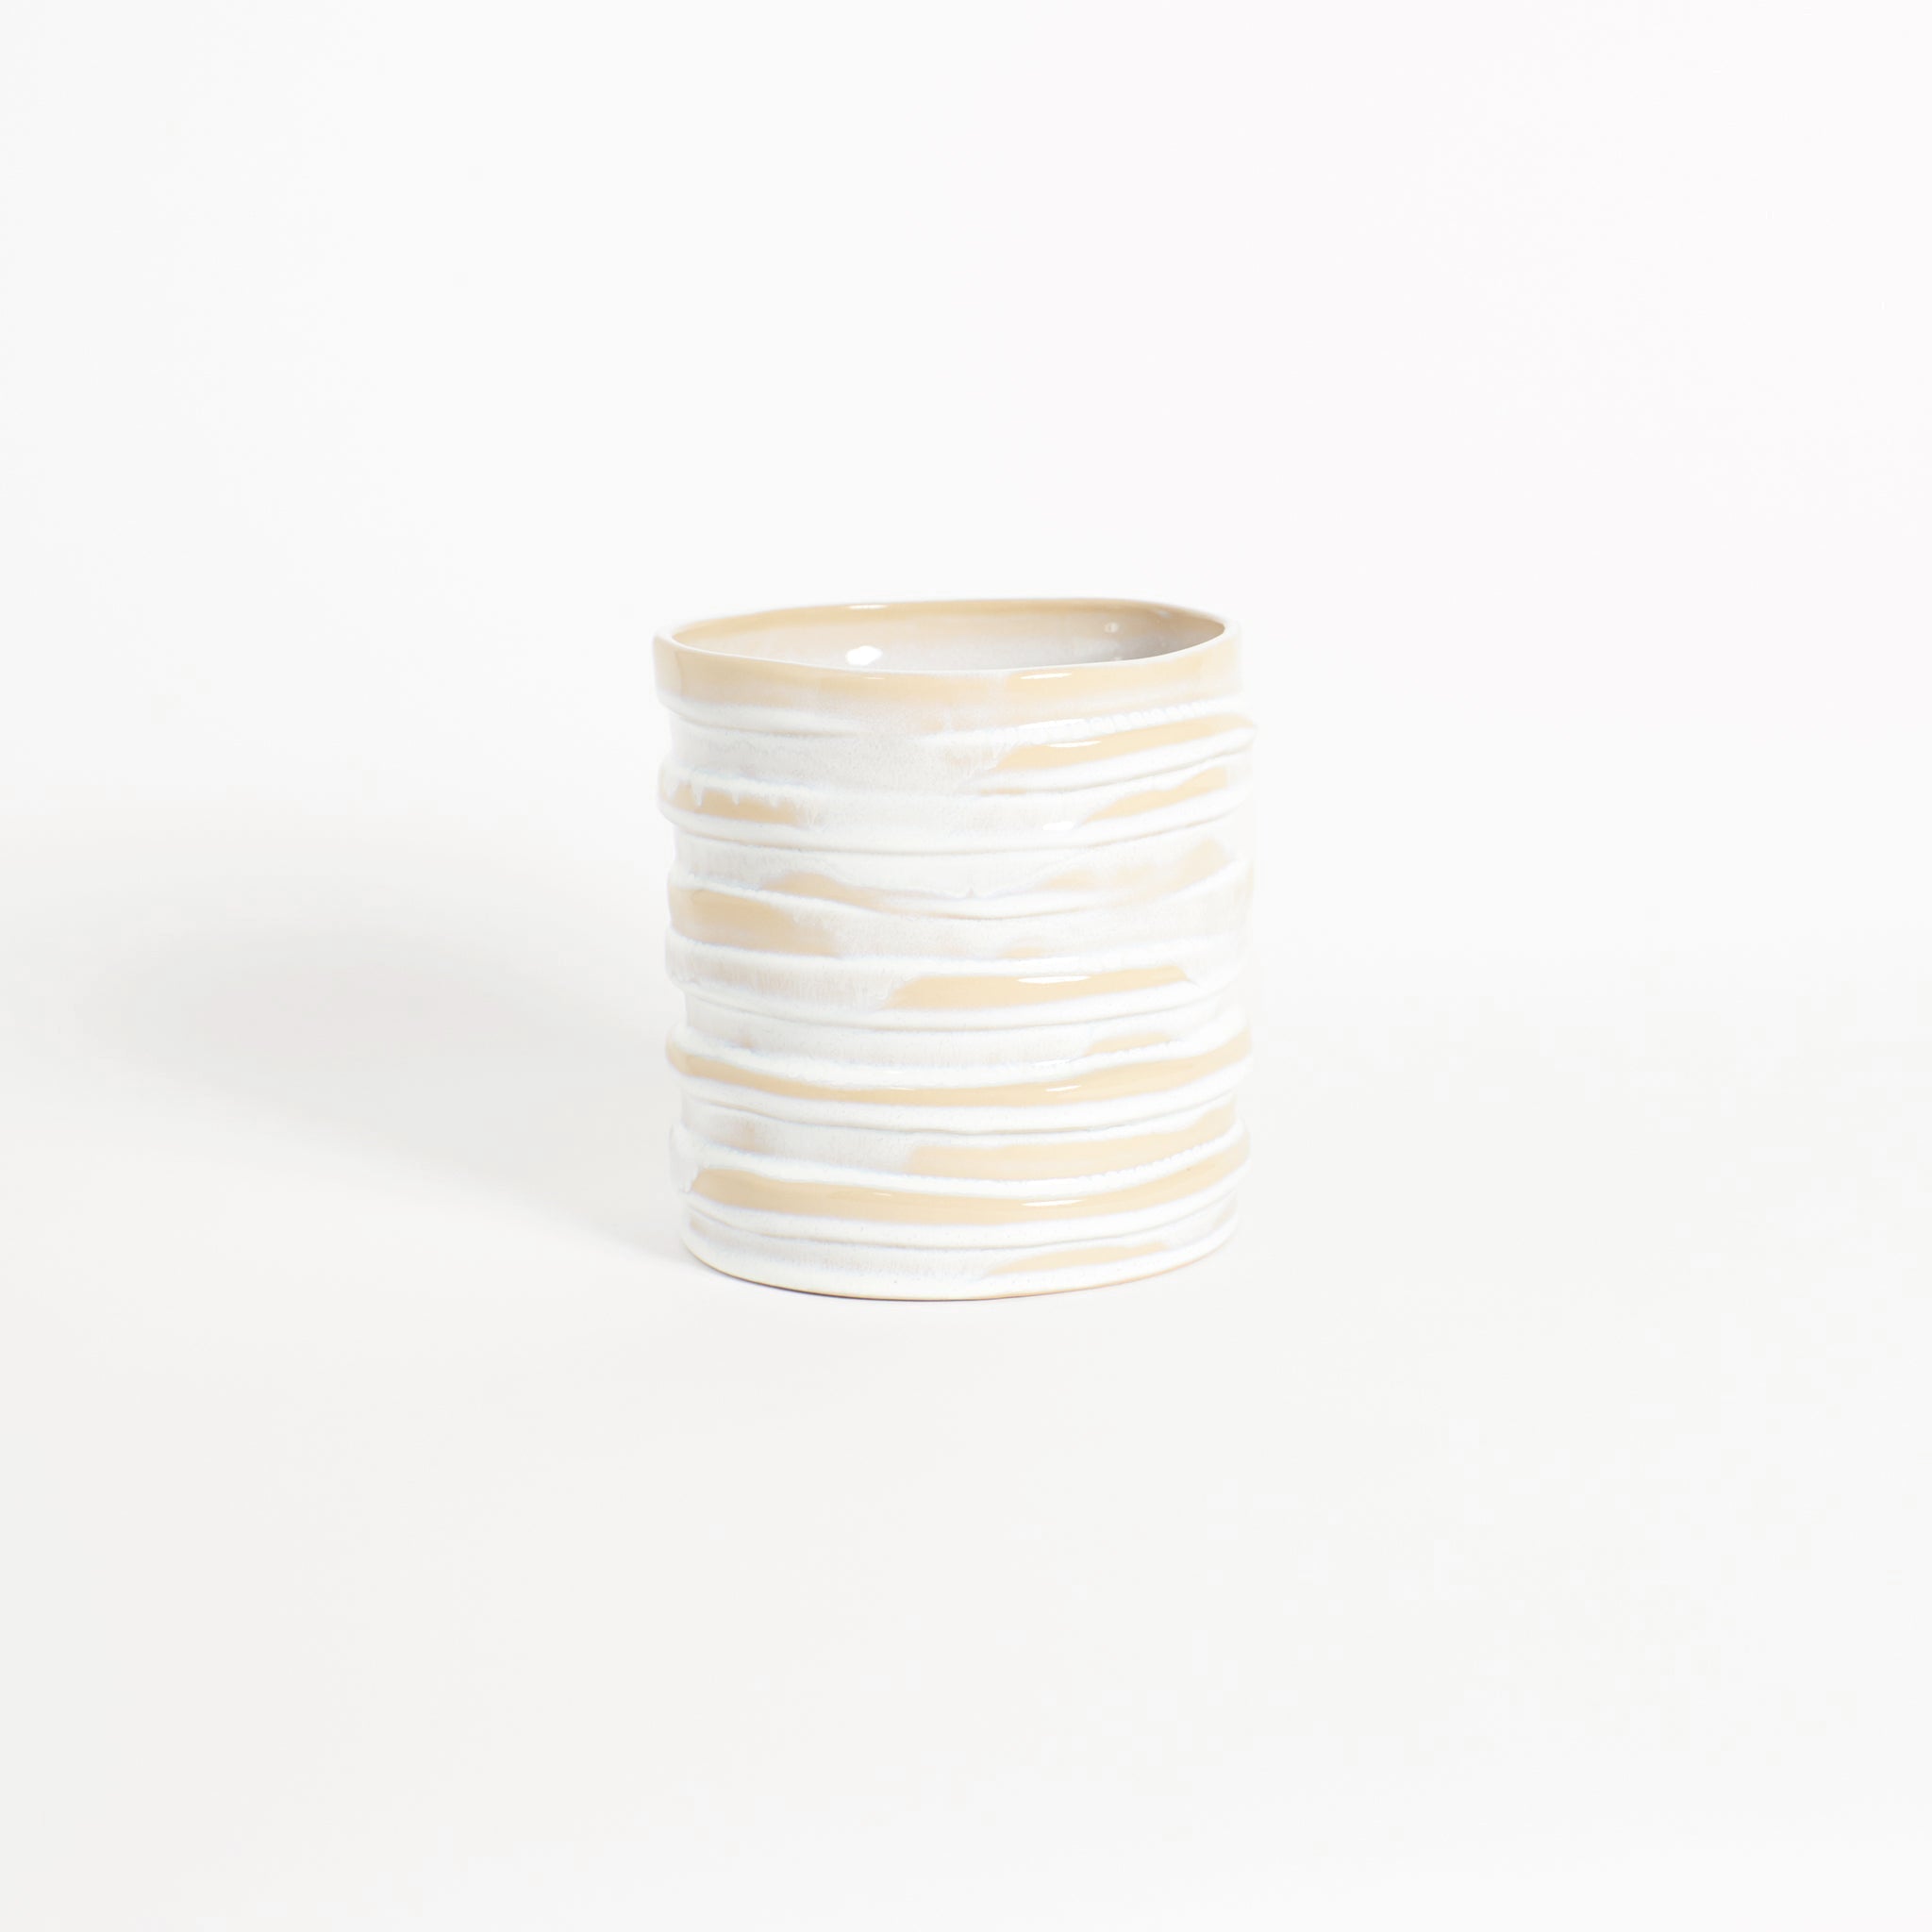 Alfonso pot - White flower pot by Project 213A